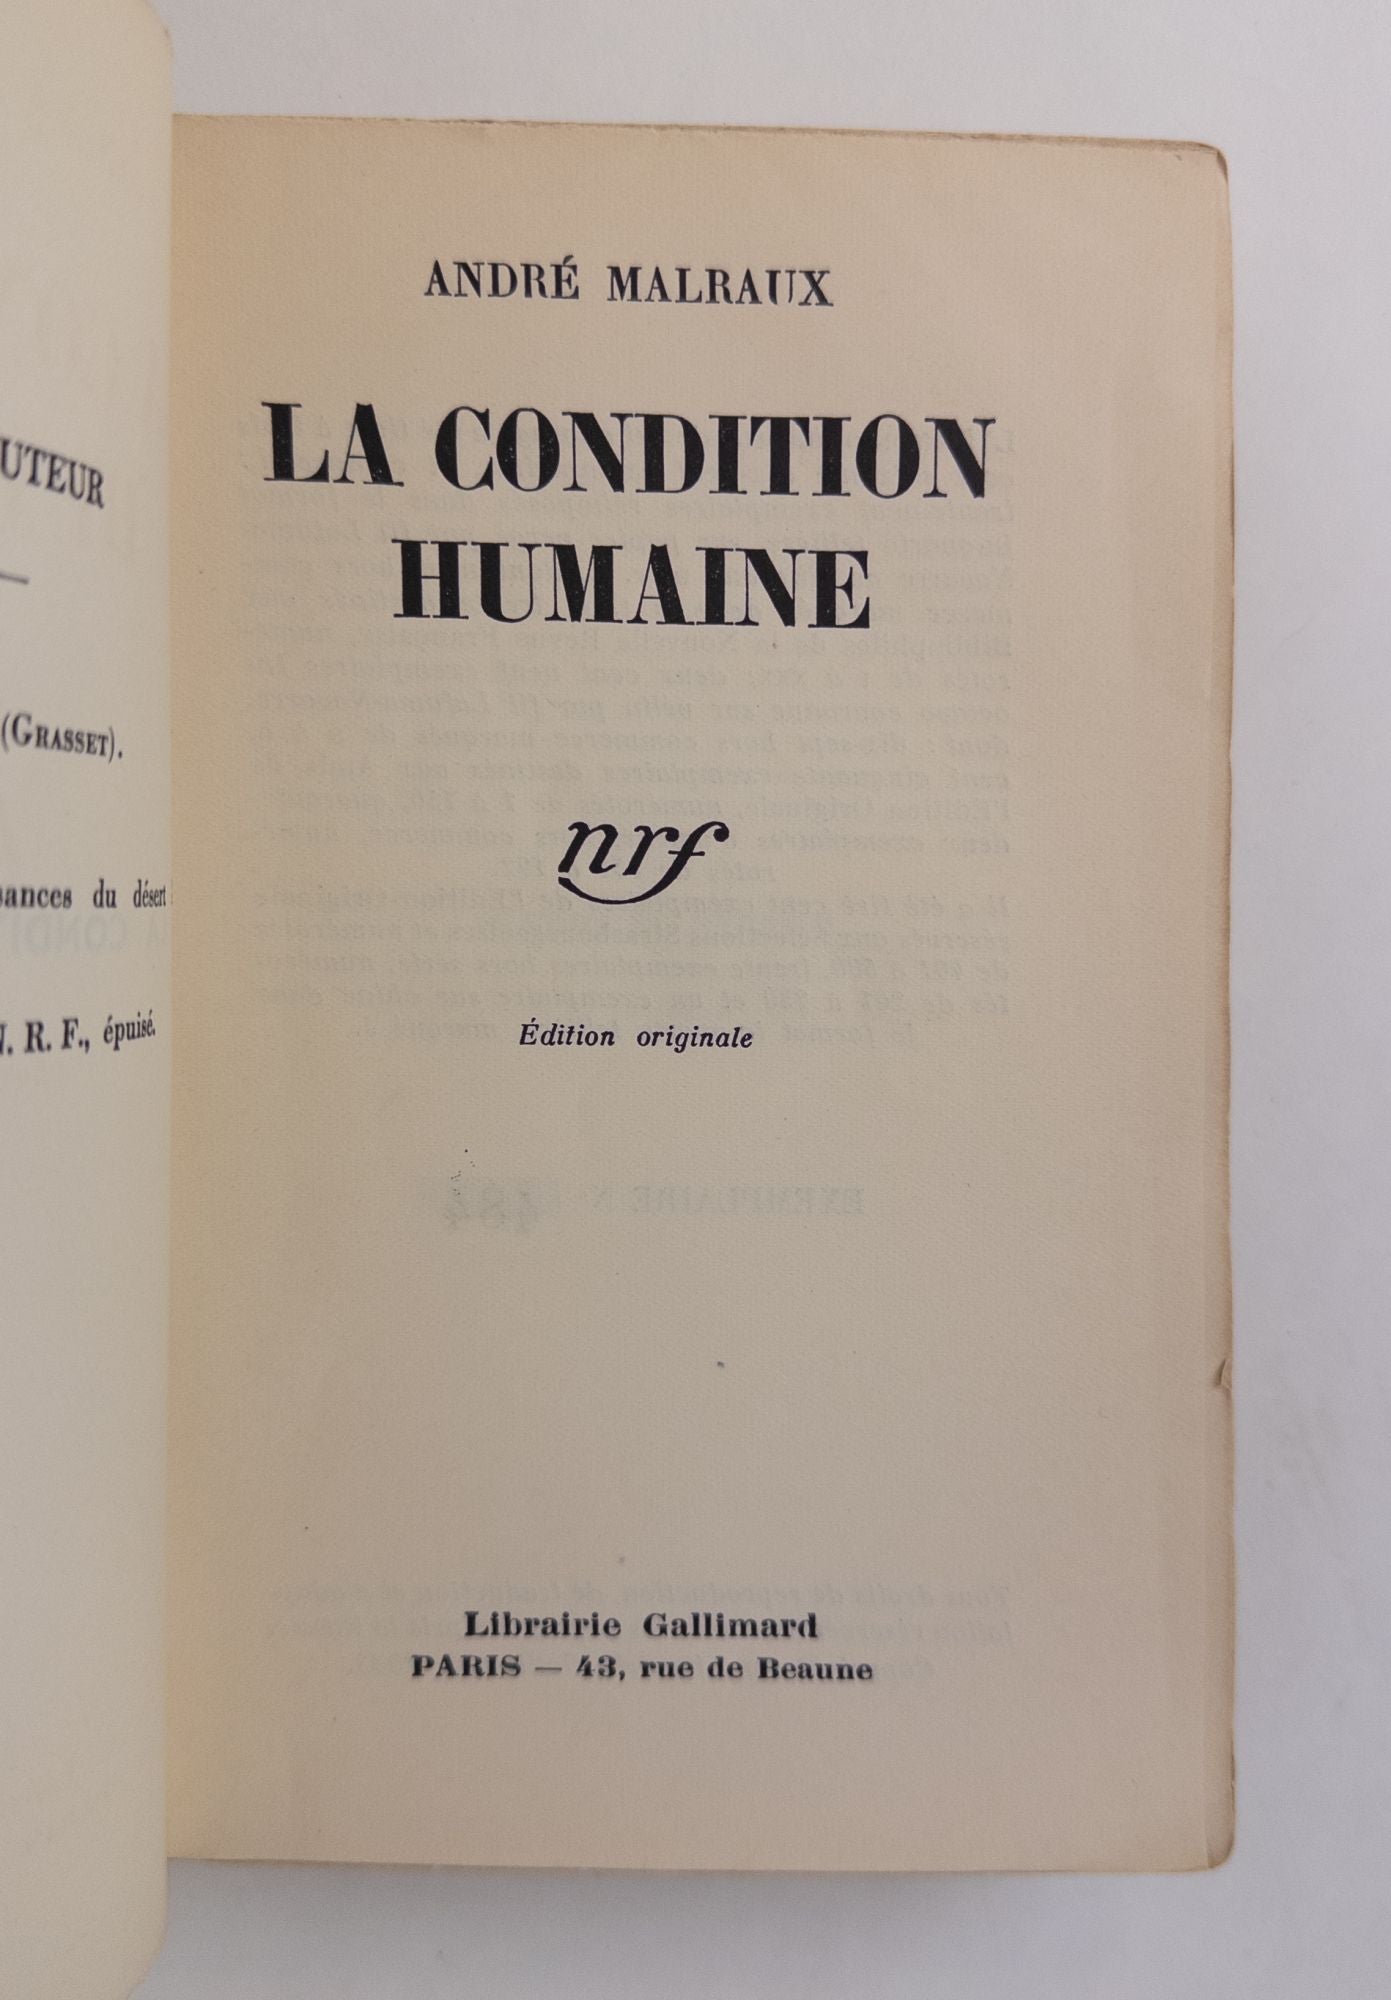 Product Image for LA CONDITION HUMAINE